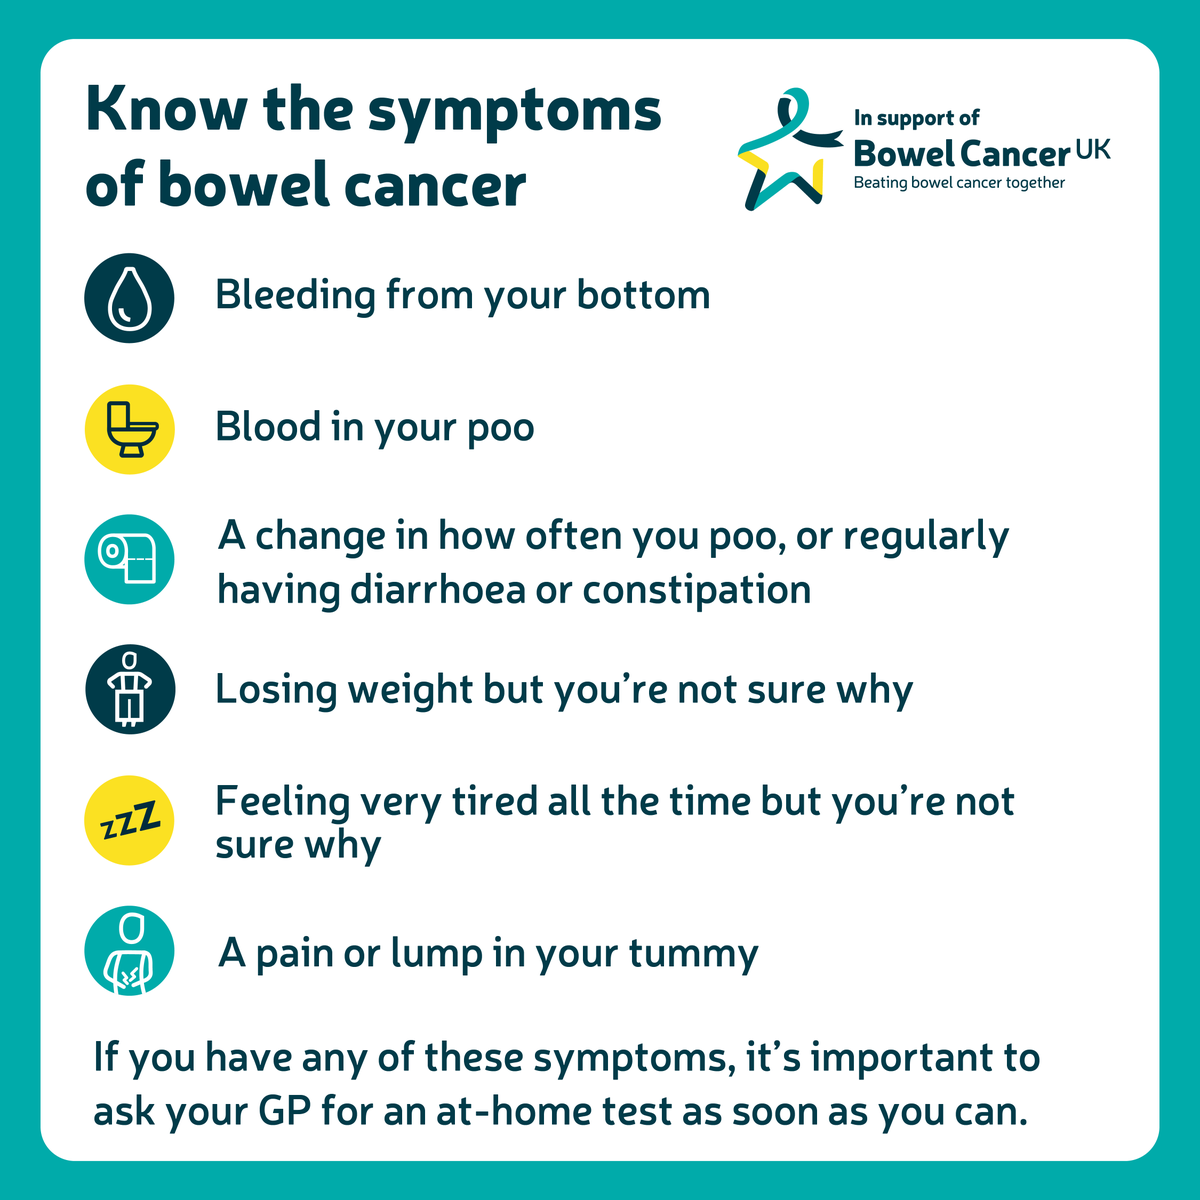 April is Bowel Cancer Awareness Month! The earlier bowel cancer is spotted, the more treatable it’s likely to be. In fact, more than 9 in 10 people survive bowel cancer when it is diagnosed at the earliest stage. Find out more about bowel cancer here: loom.ly/7I7cu_0